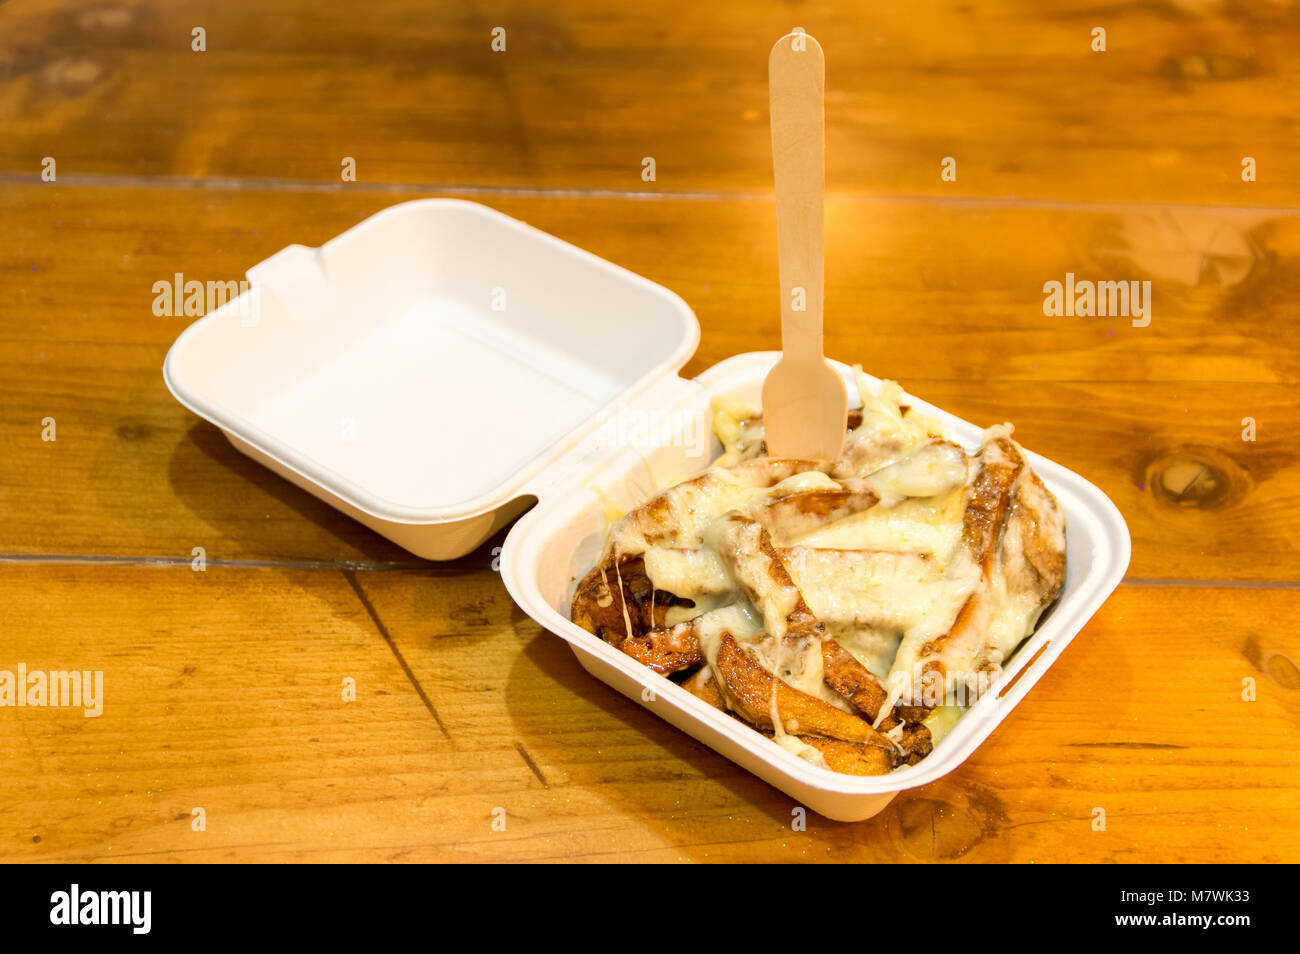 Home made Cheesy Chips in Take Away Carton Stock Photo